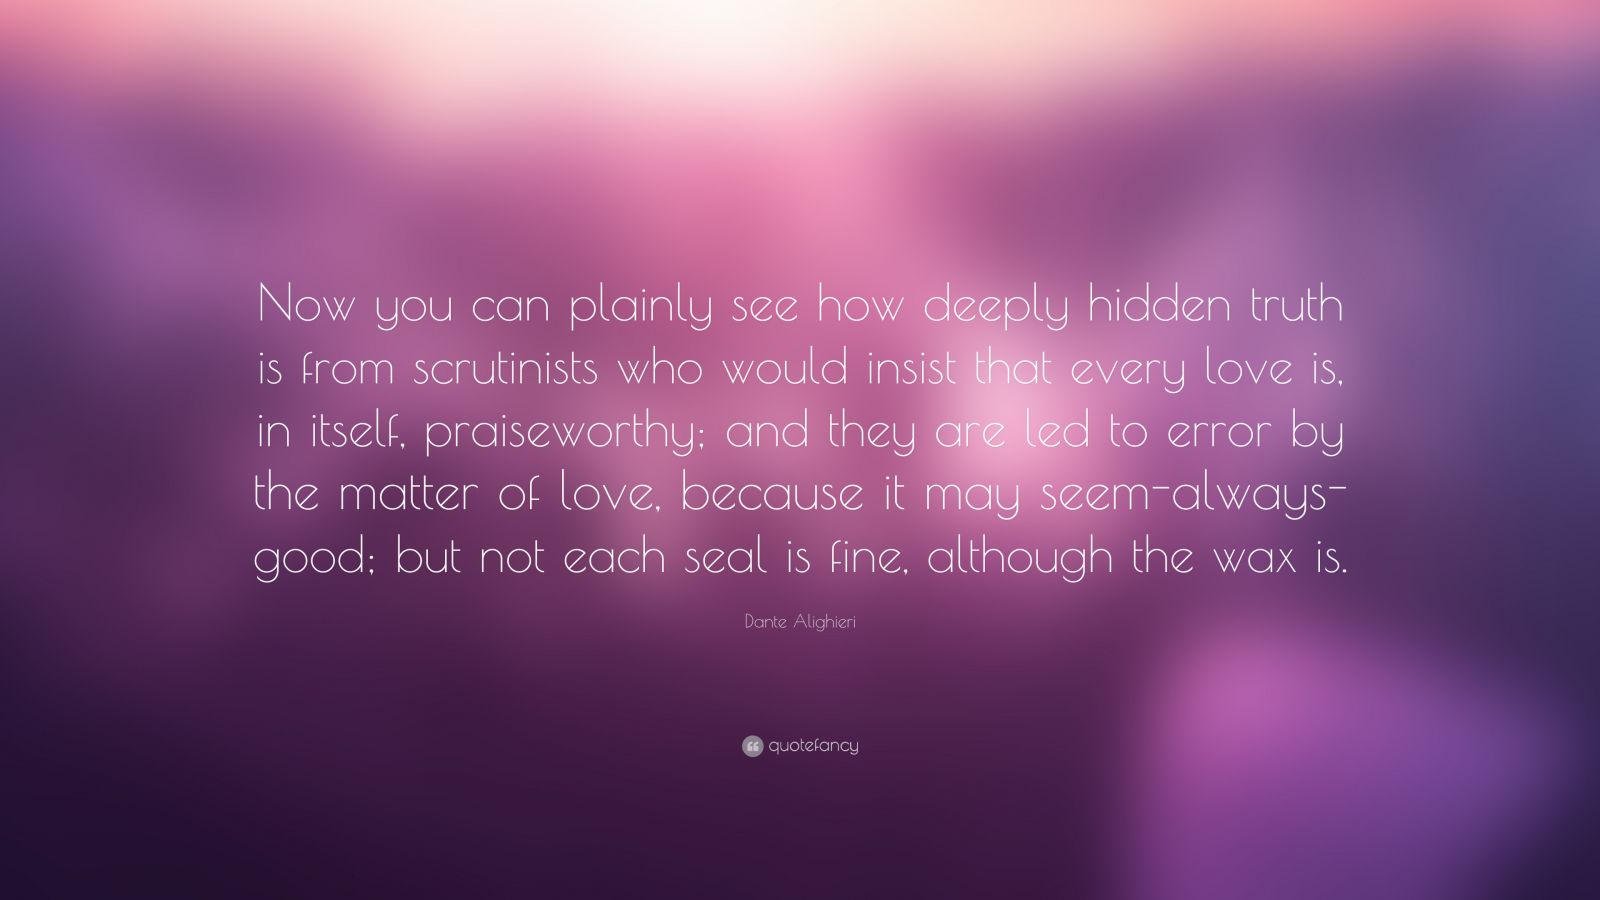 Dante Alighieri Quote: “Now you can plainly see how deeply hidden truth ...